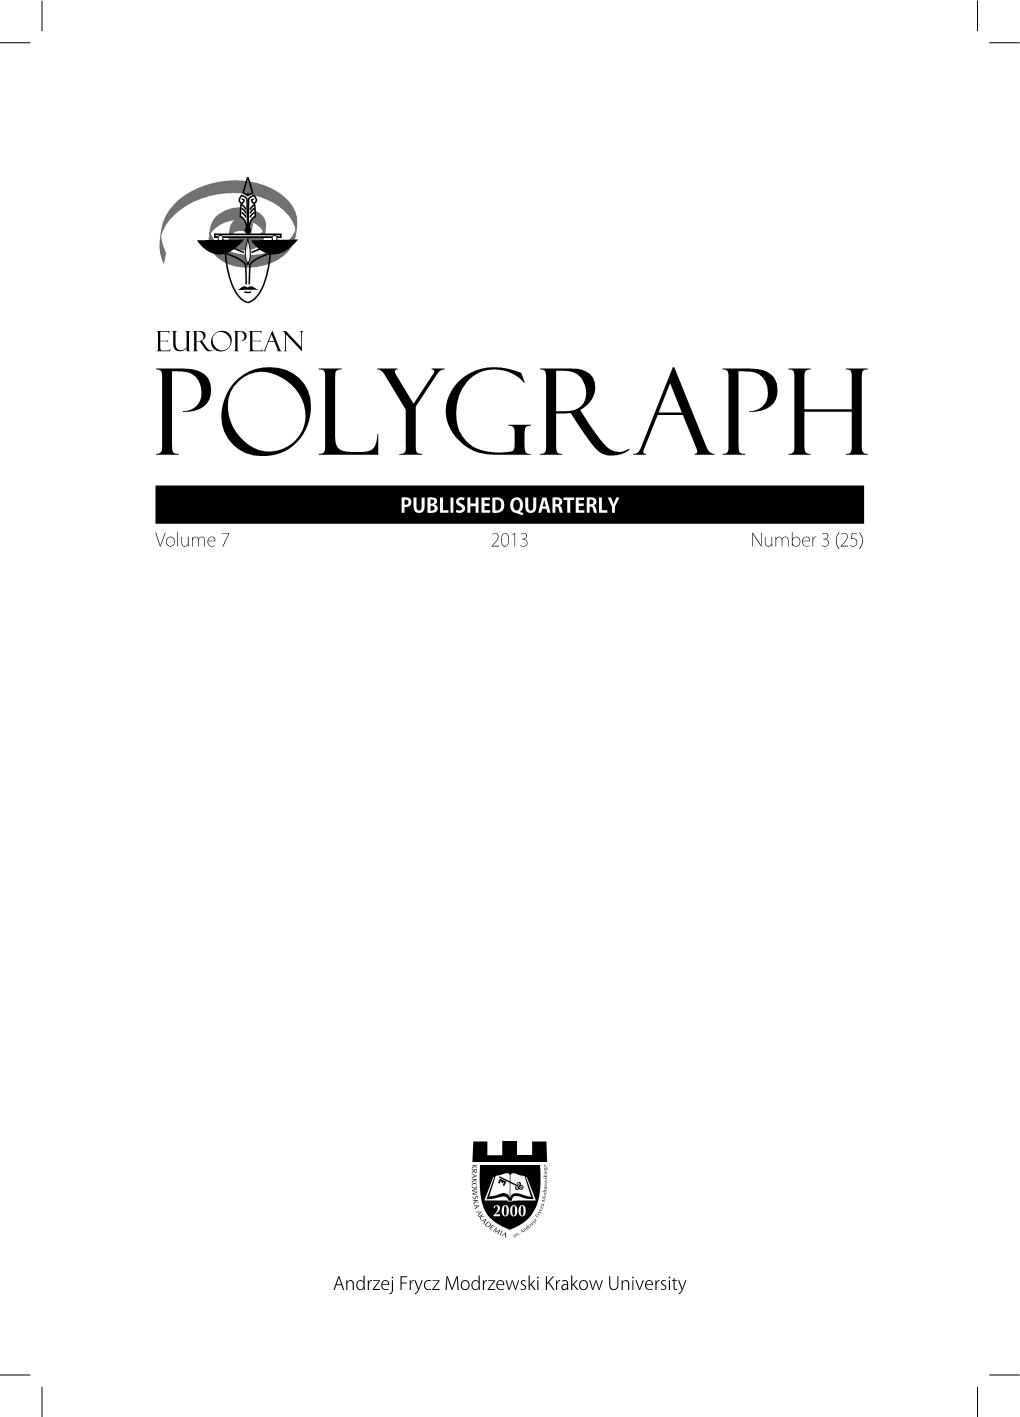 Report from the International Polygraph Seminar – Waplewo, Poland, 25th–27th September 2013